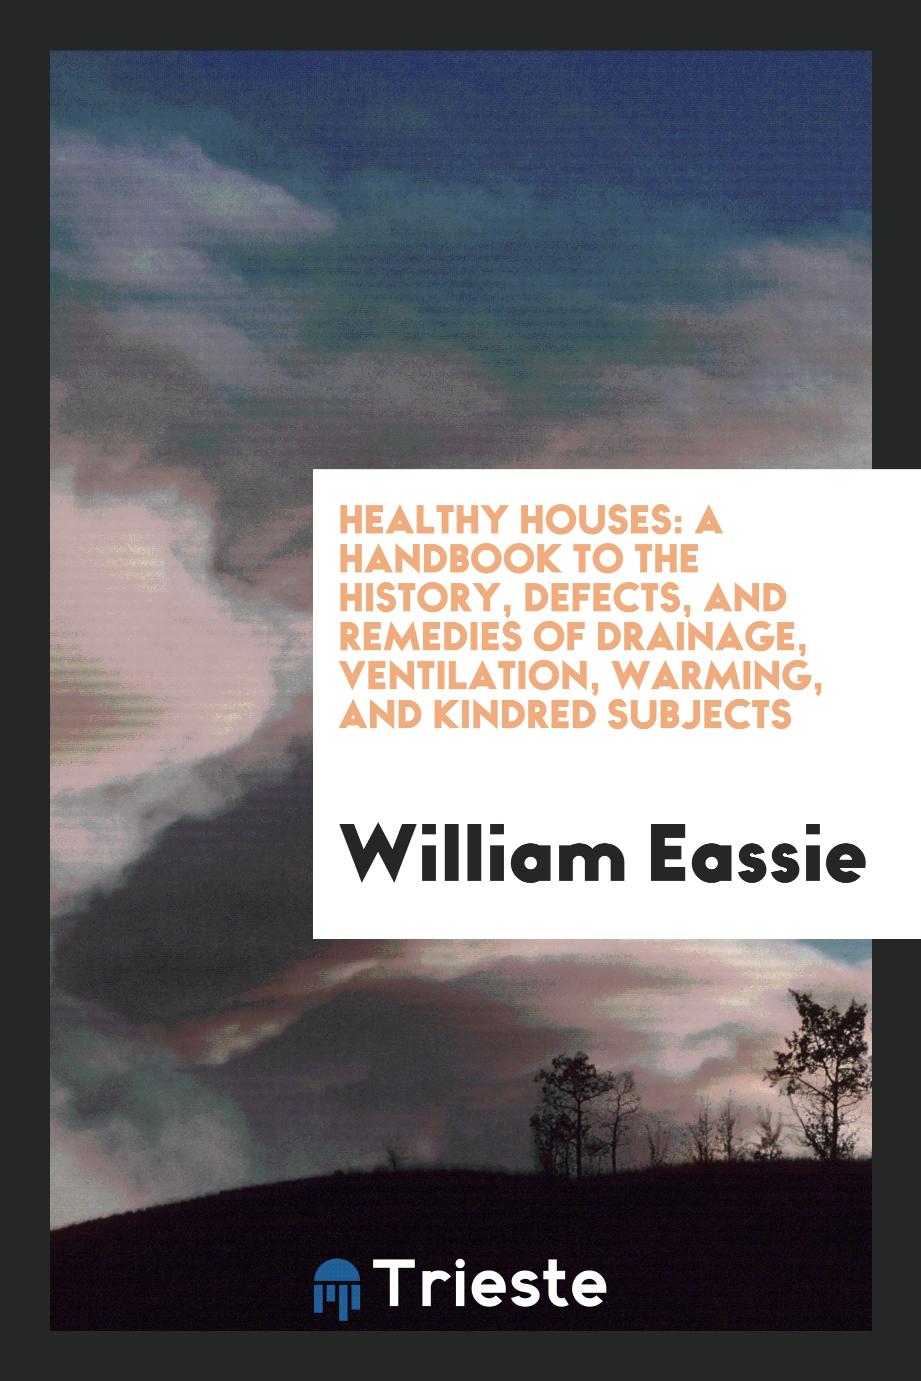 Healthy Houses: A Handbook to the History, Defects, and Remedies of Drainage, Ventilation, Warming, and Kindred Subjects